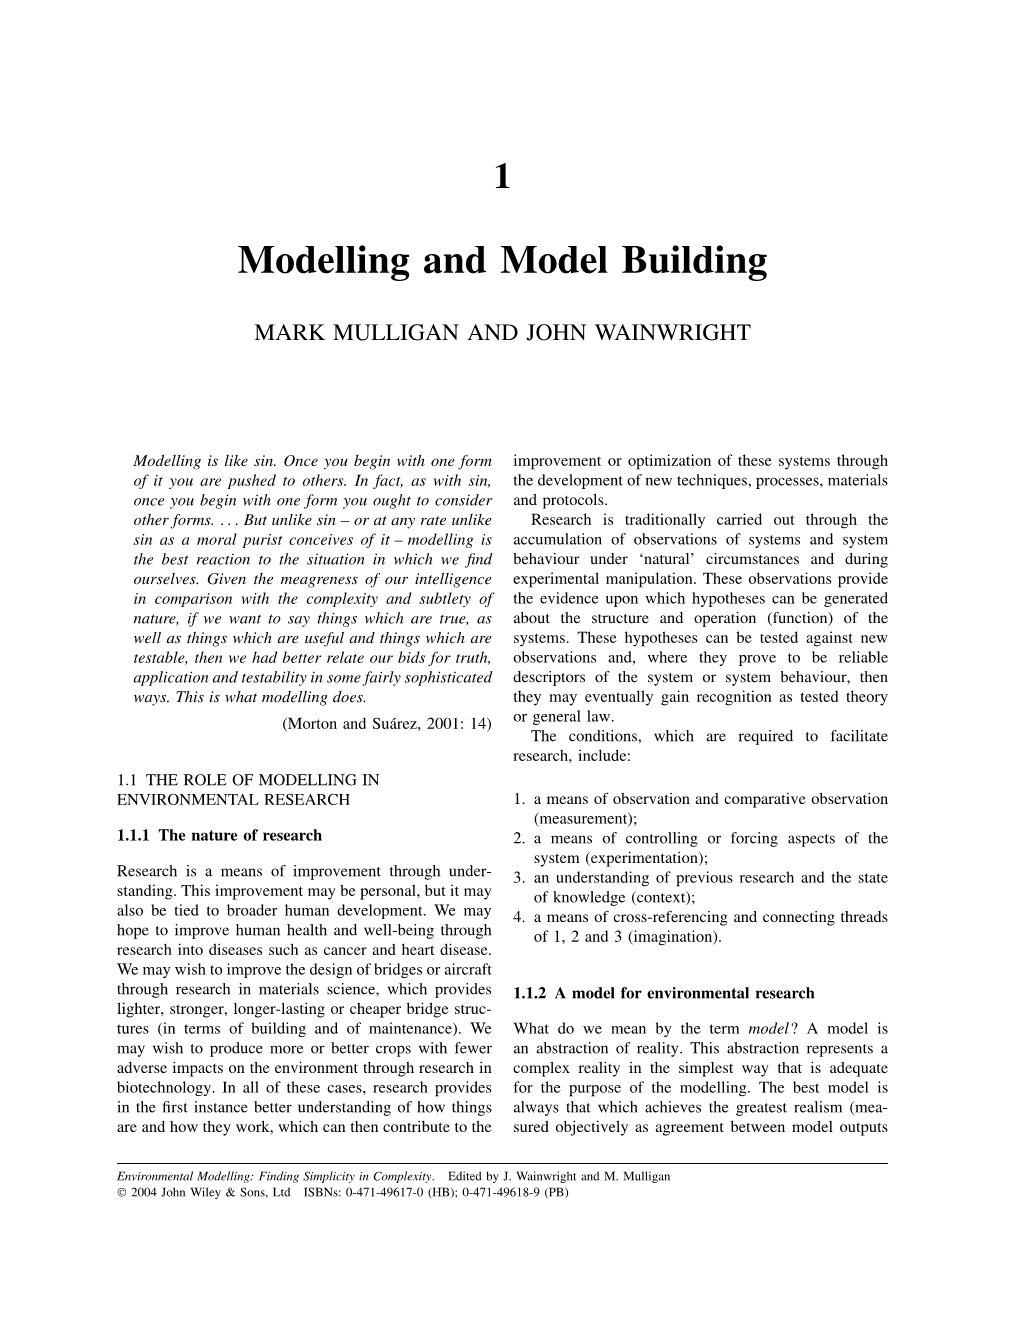 Modelling and Model Building